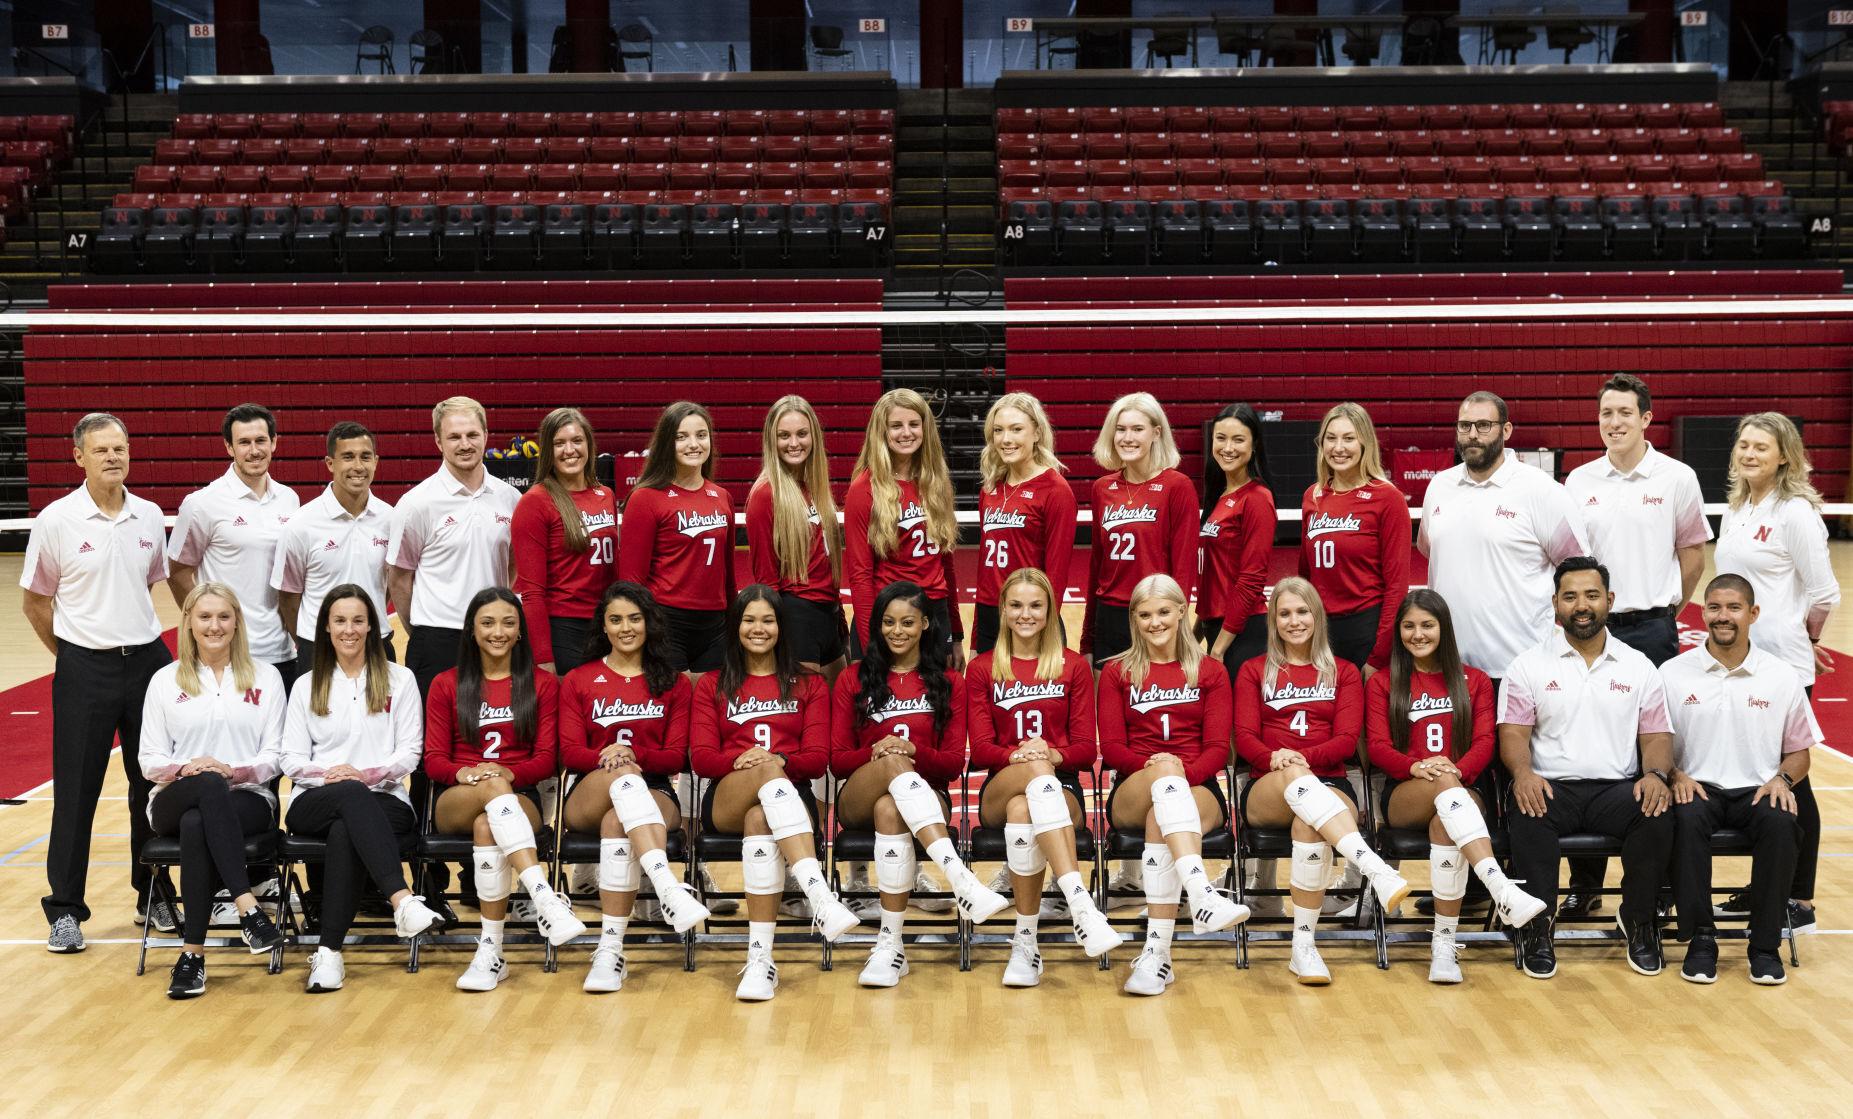 Nebraska volleyball will be on TV a lot this season. Here's the start of that list